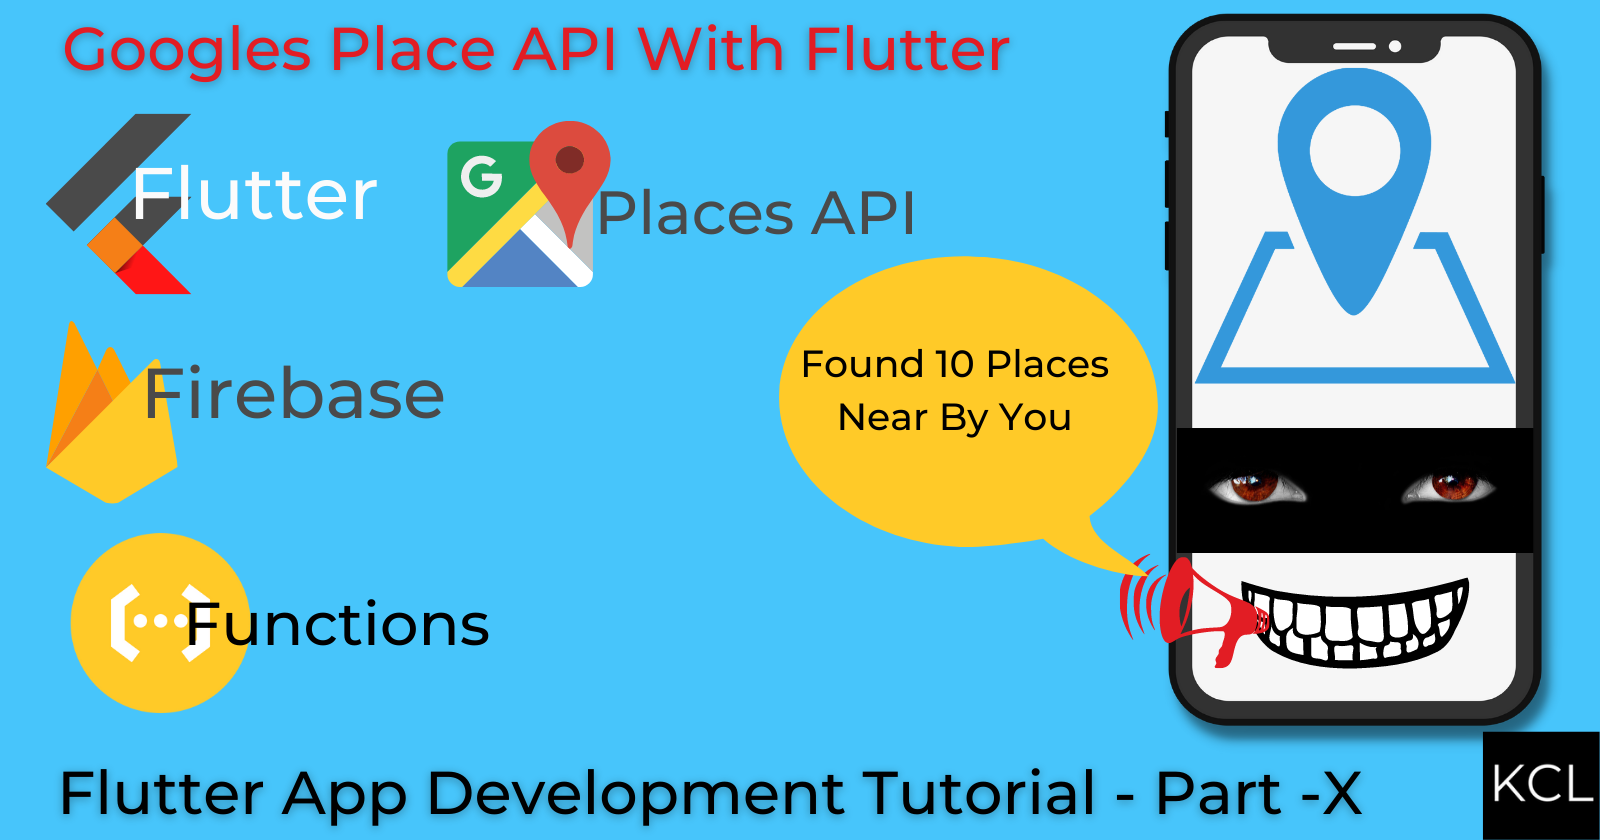 Googles Places API WIth Flutter